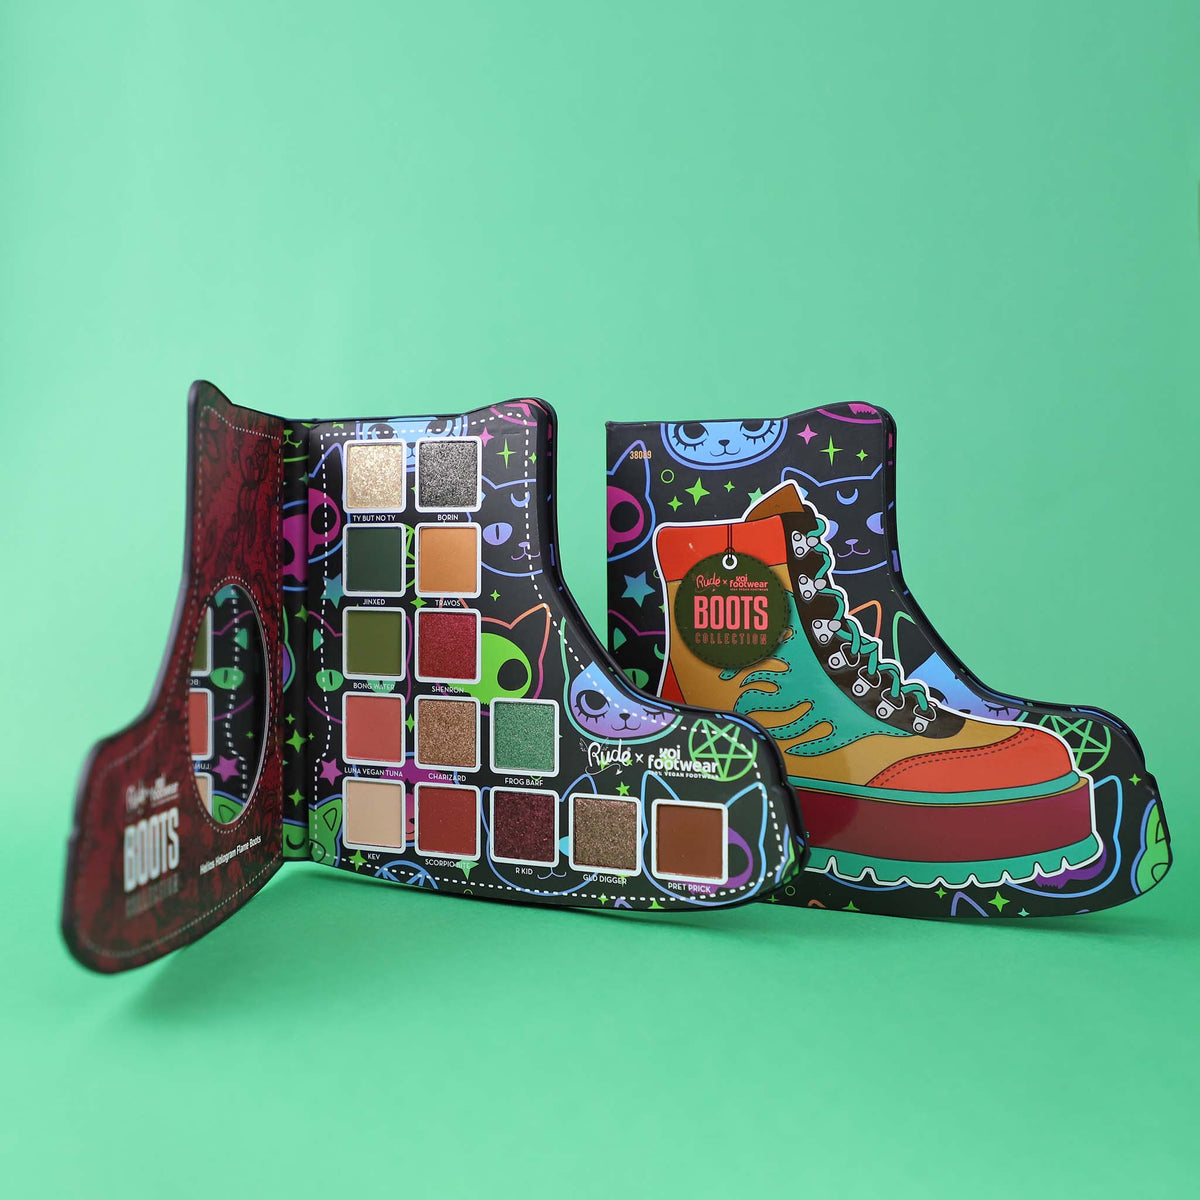 Rude x Koi Footwear Boots Collection - Helios Hologram Flame Boots